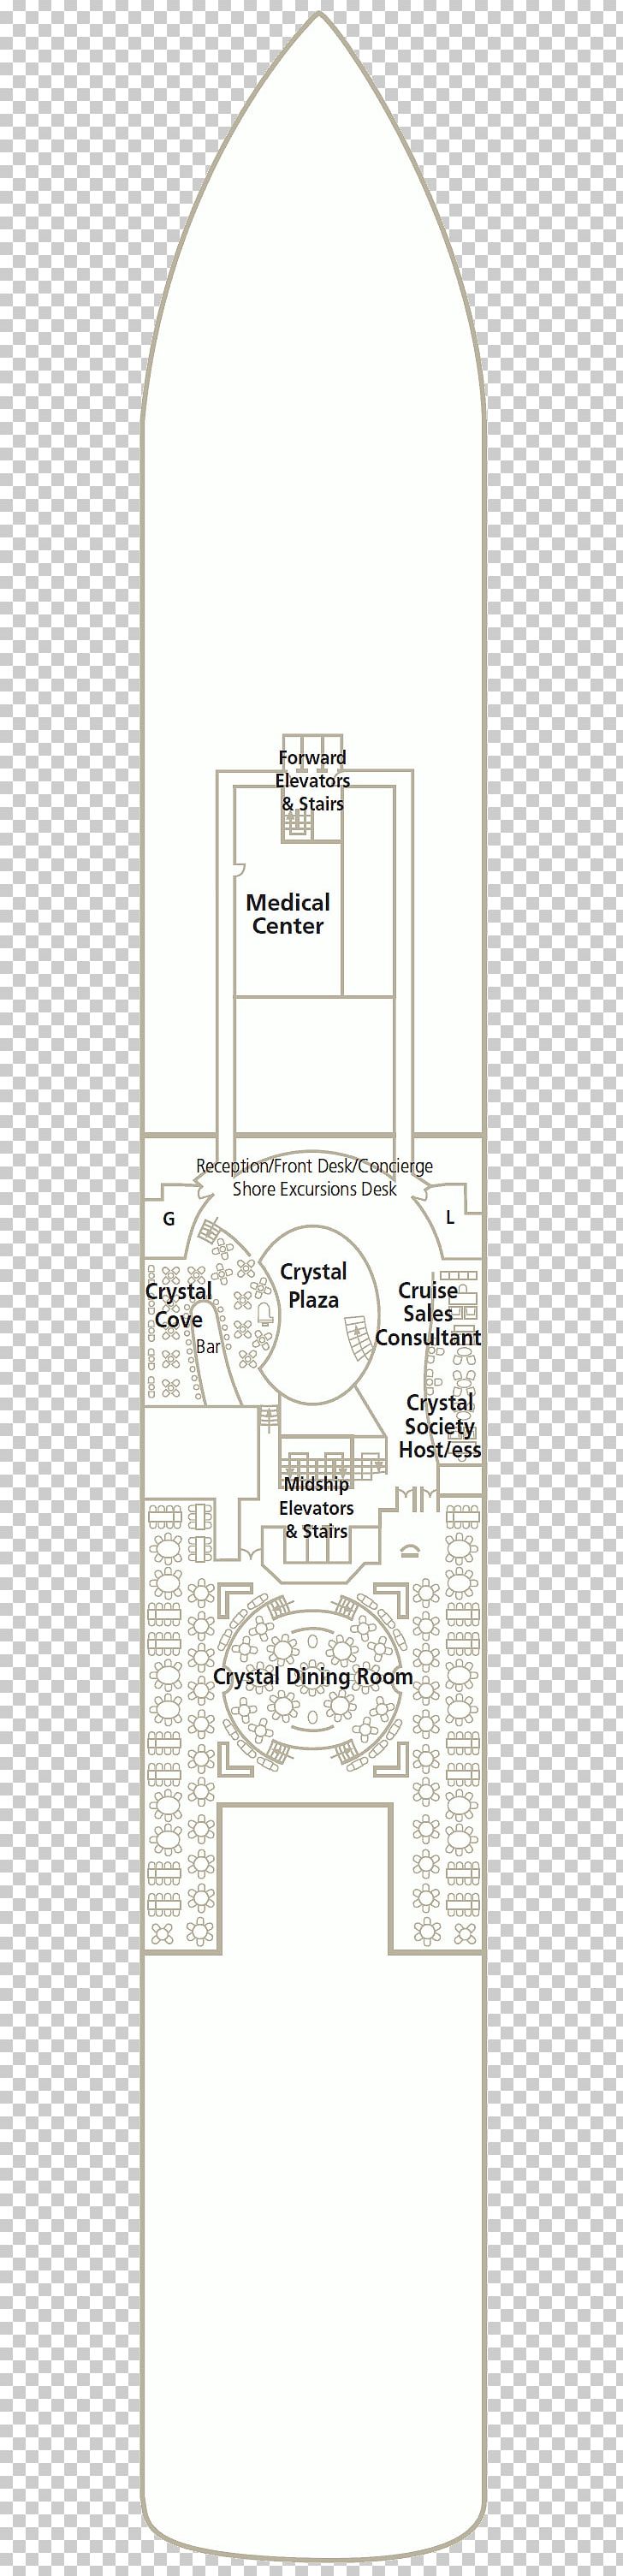 Crystal Serenity Cruise Ship Deck Floor Plan PNG, Clipart, Black And White, Brand, Cruise Ship, Crystal Cruises, Deck Free PNG Download